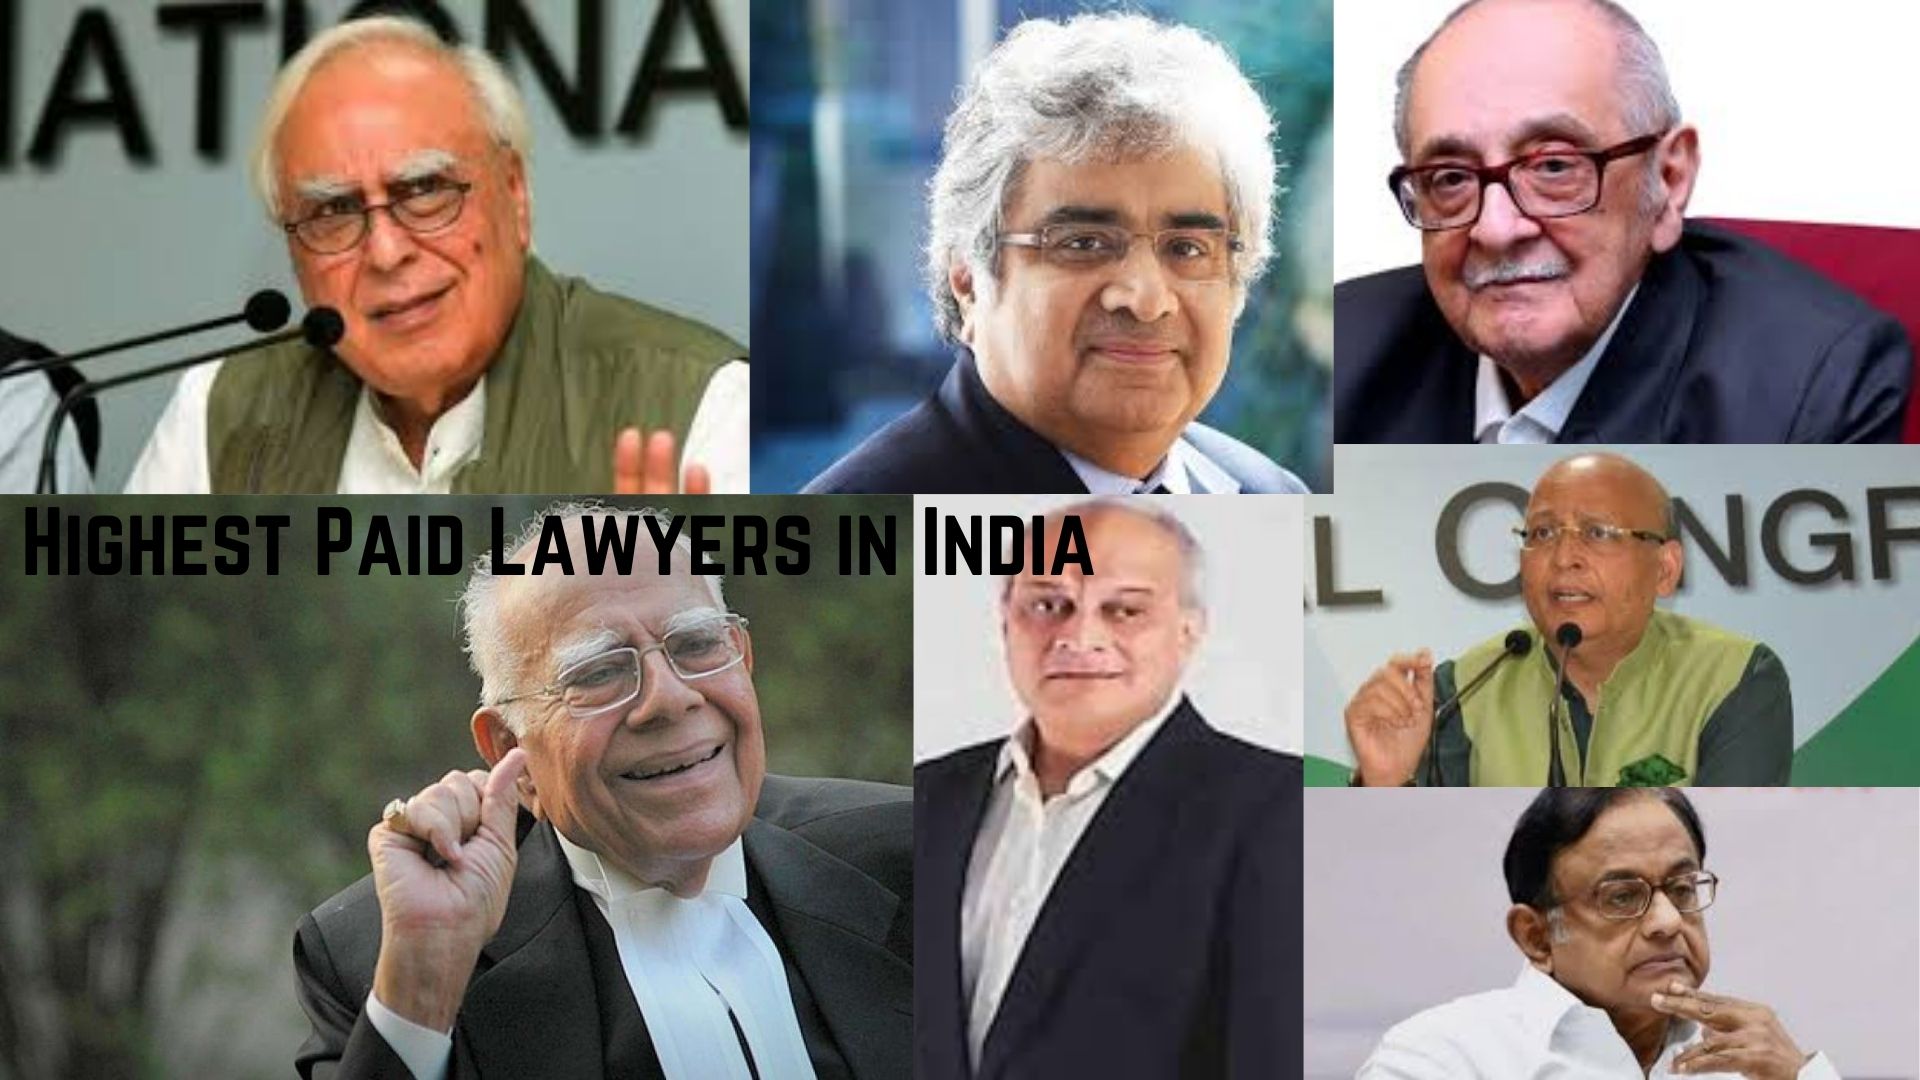 Highest Paid Lawyers in India